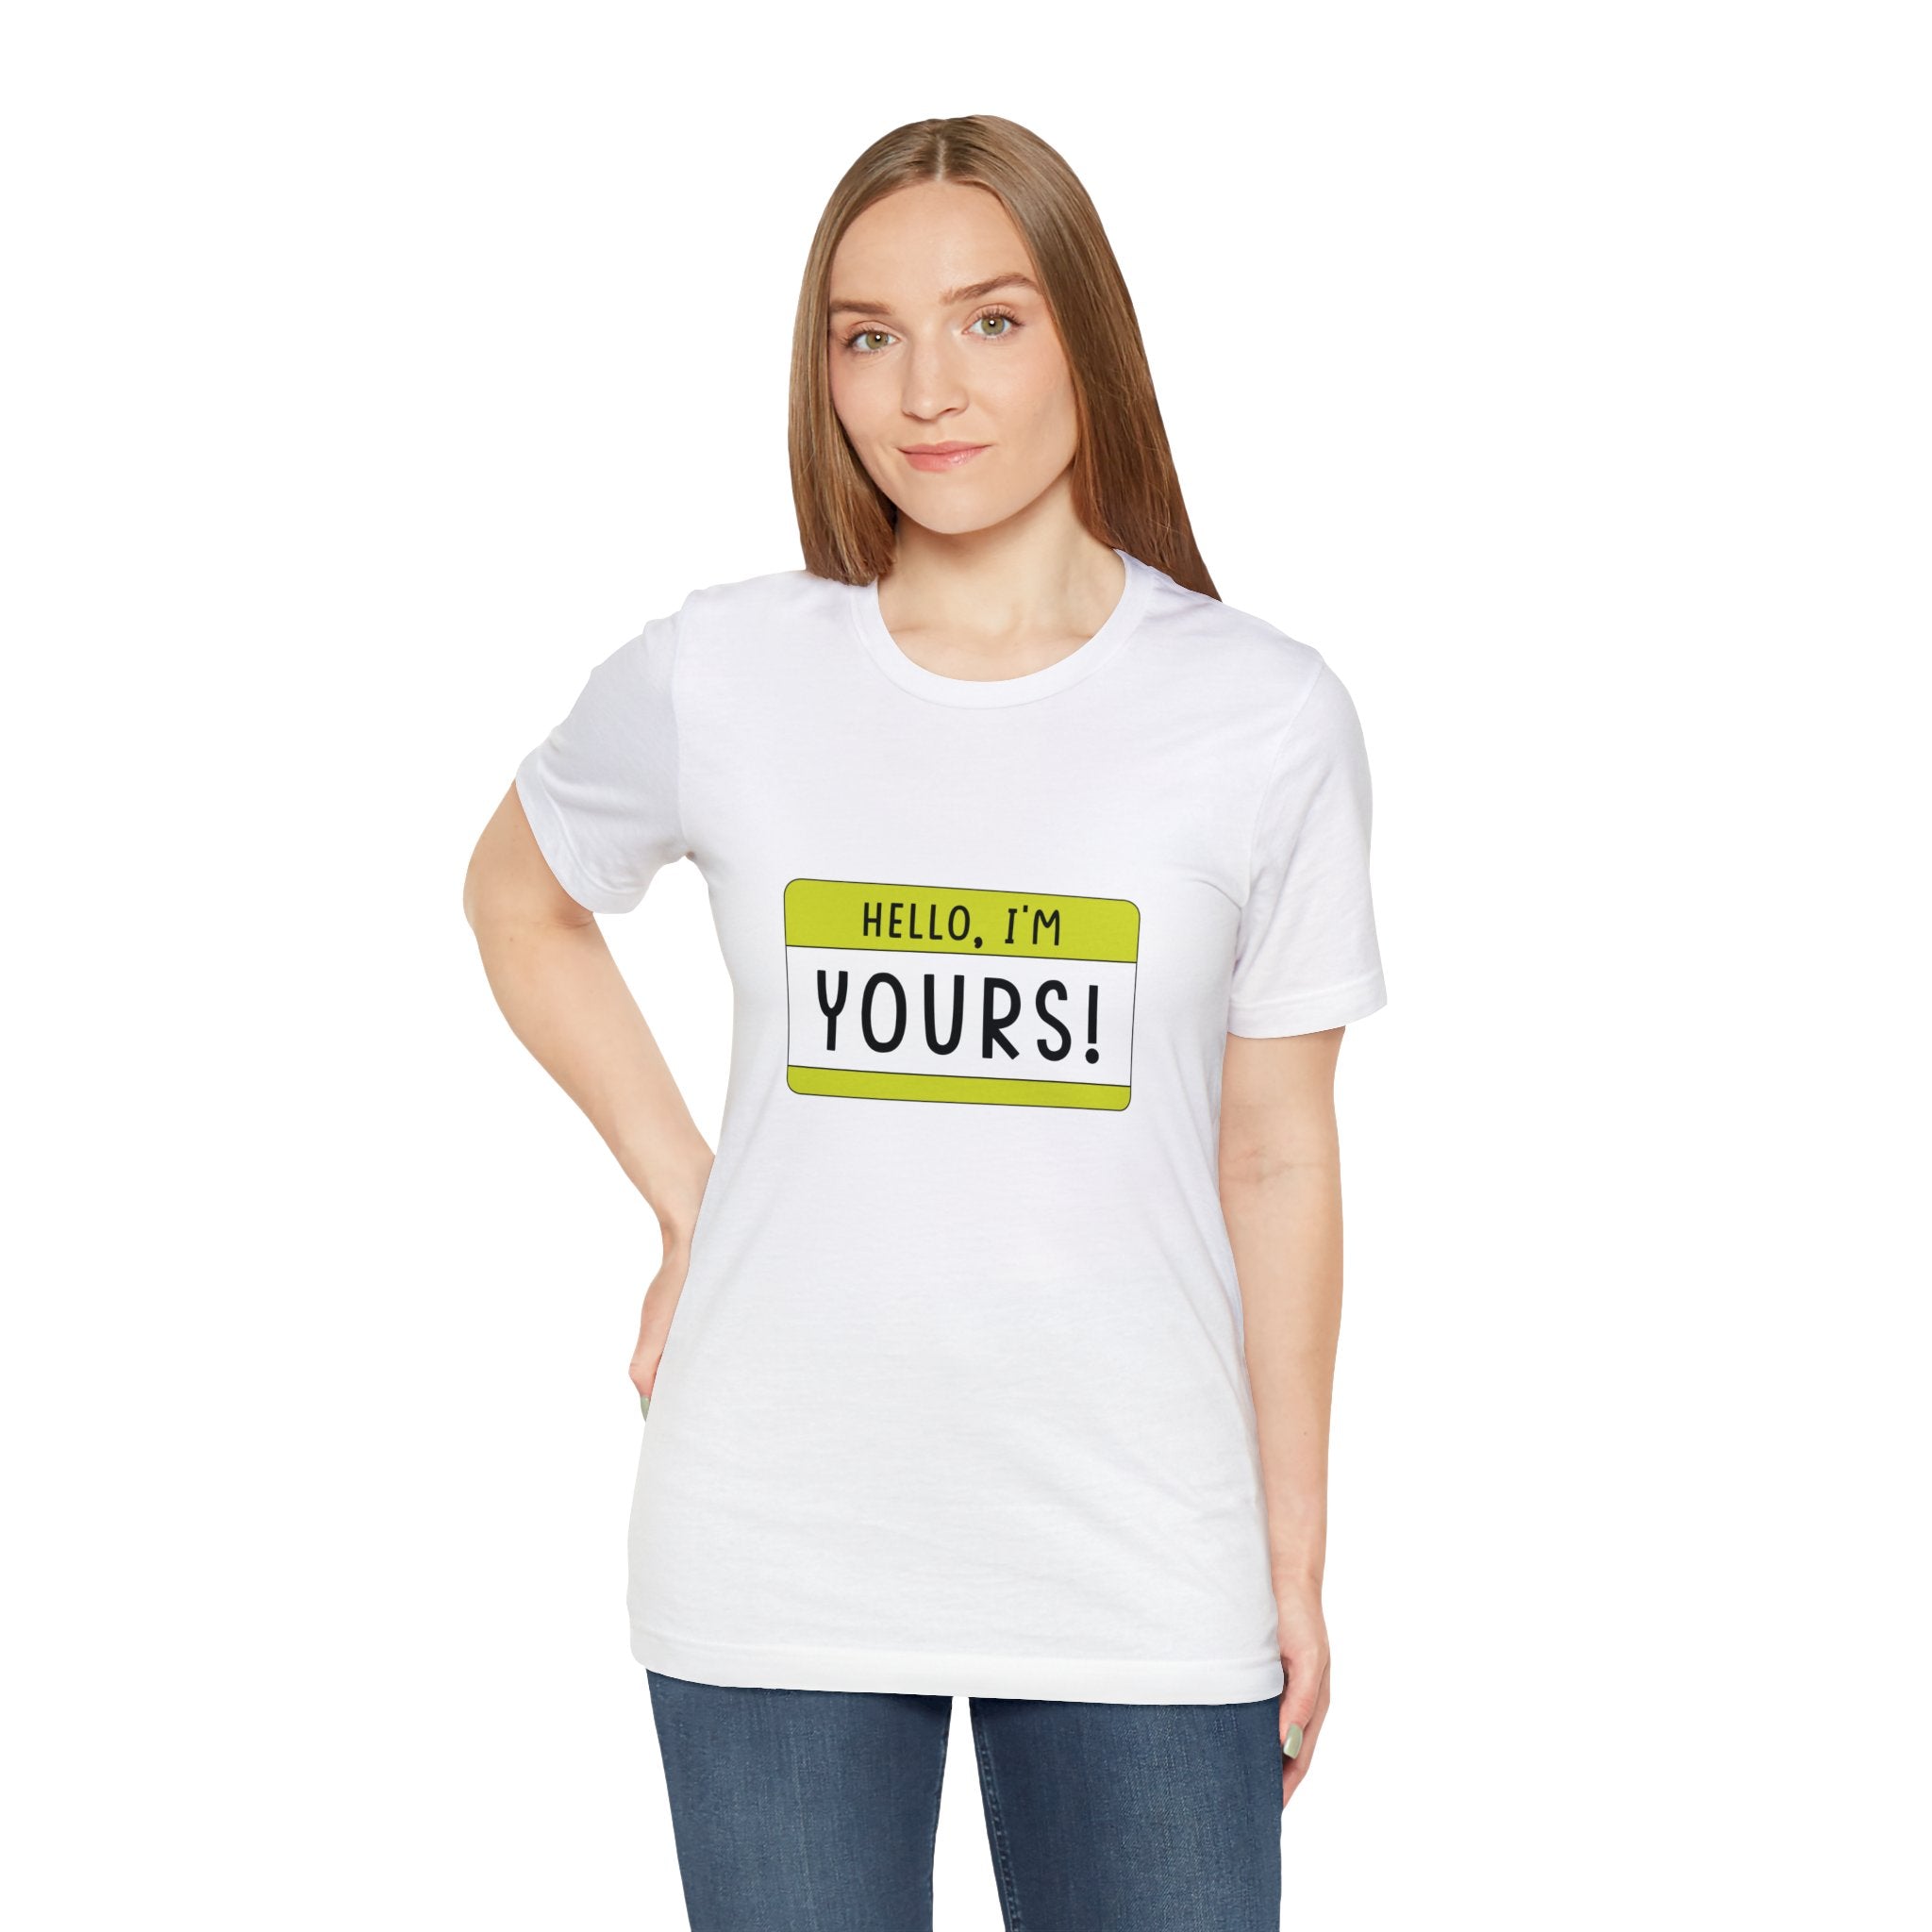 Hello, I'm YOURS T-Shirt